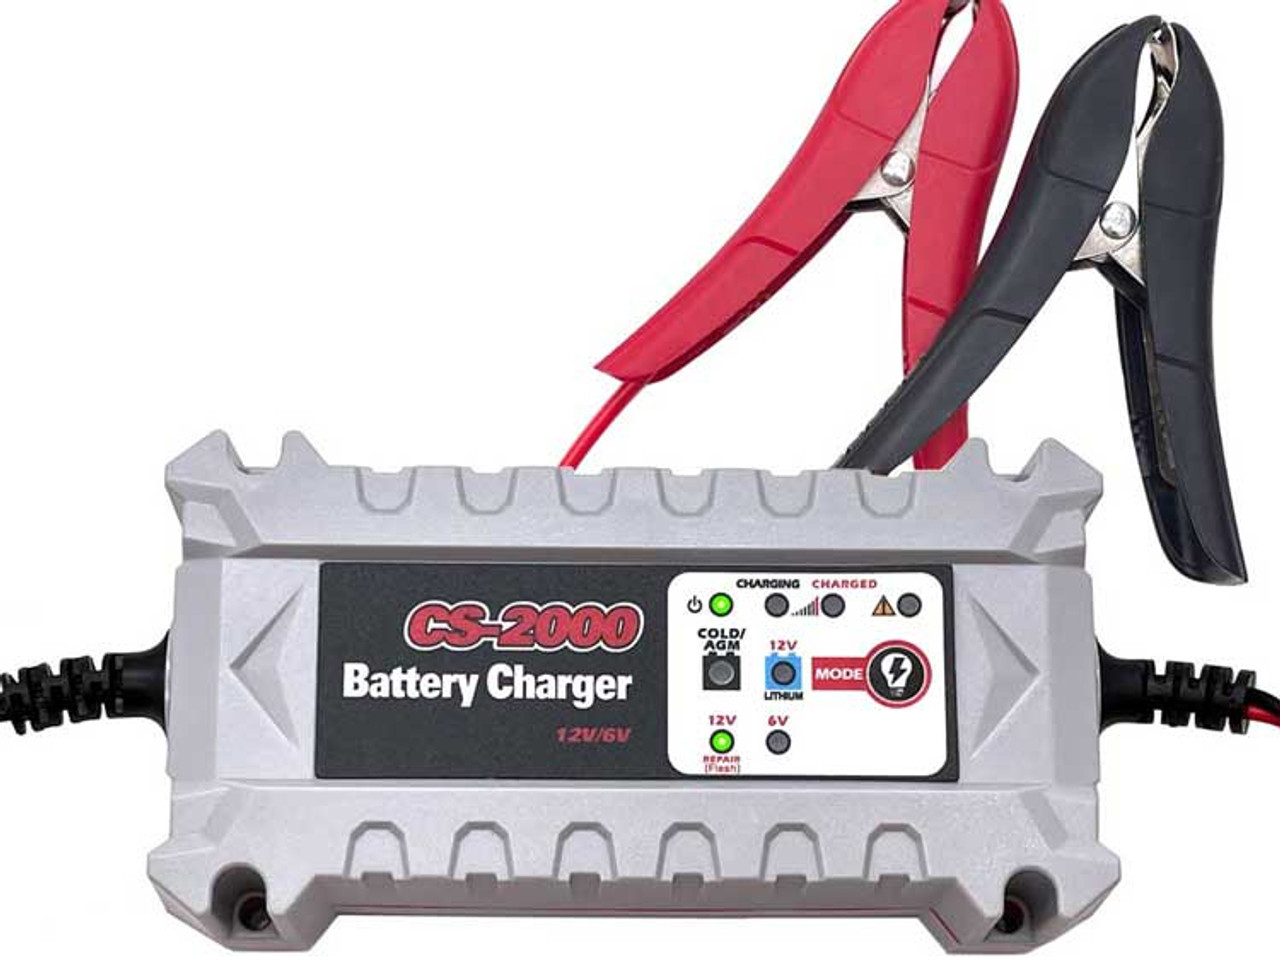 Lithium Compatible 2Ah Smart Battery Charger and Maintainer